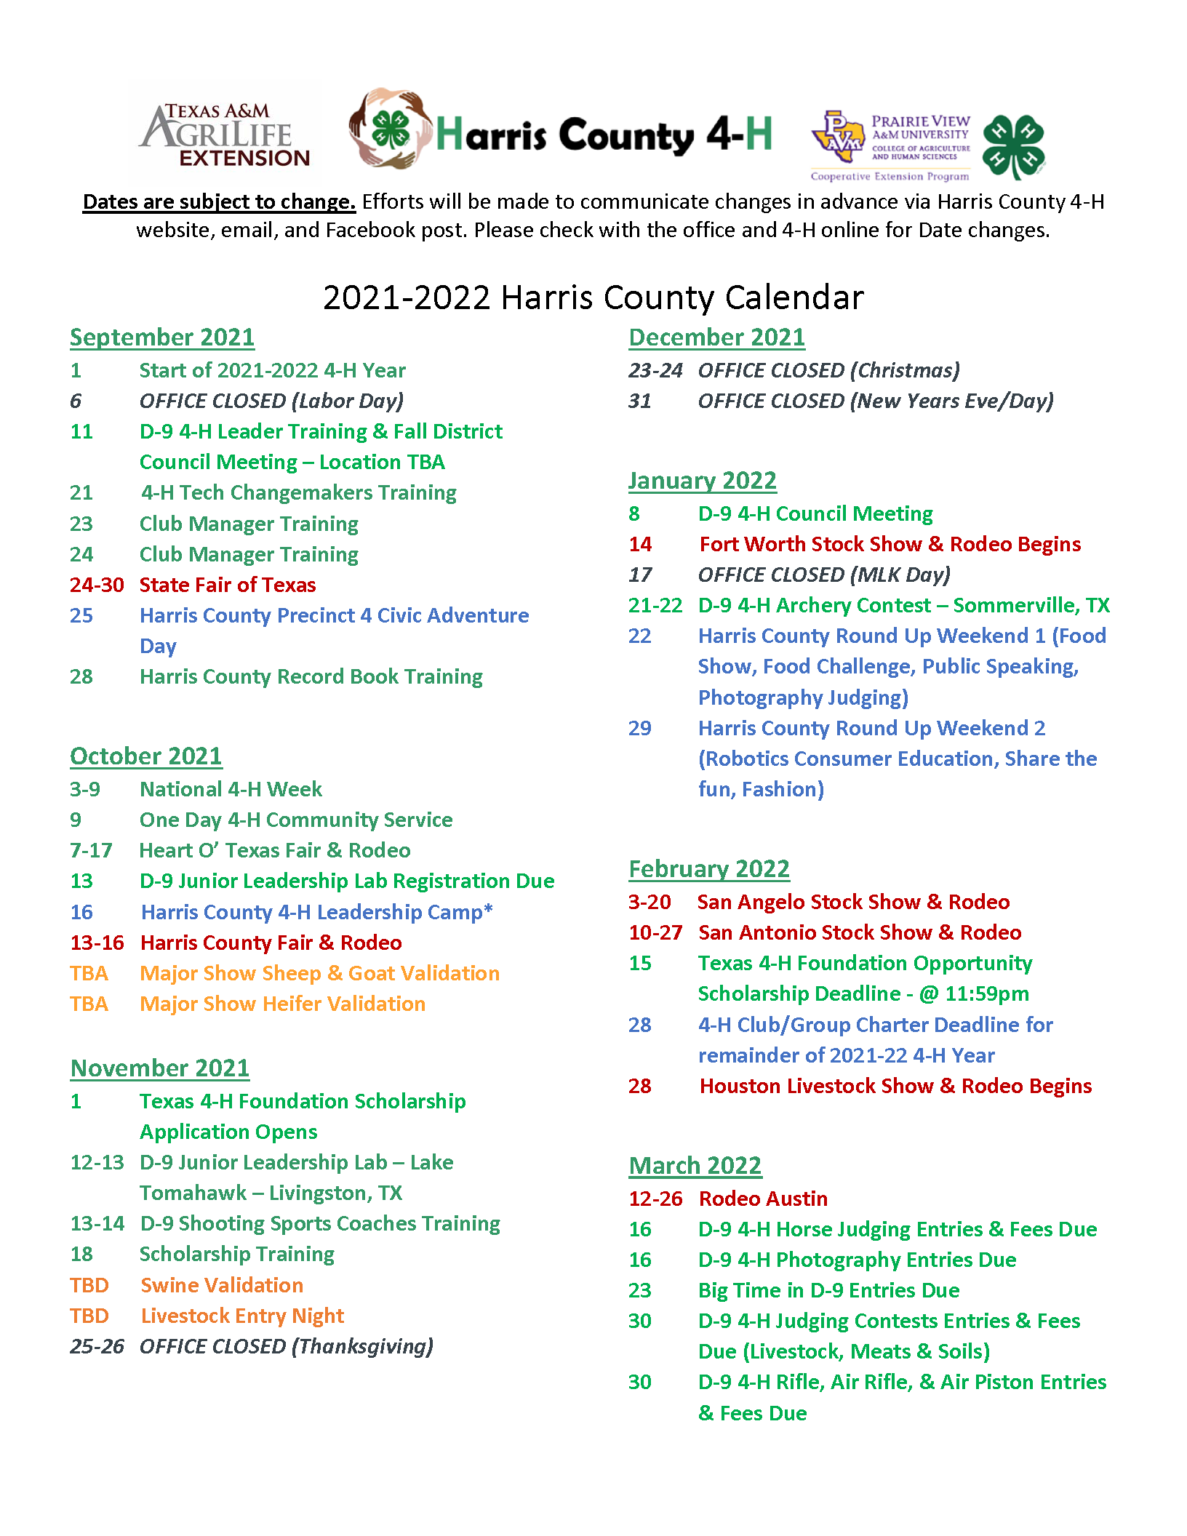 2021-2022 Harris County 4-H Calendar updated_Page_1